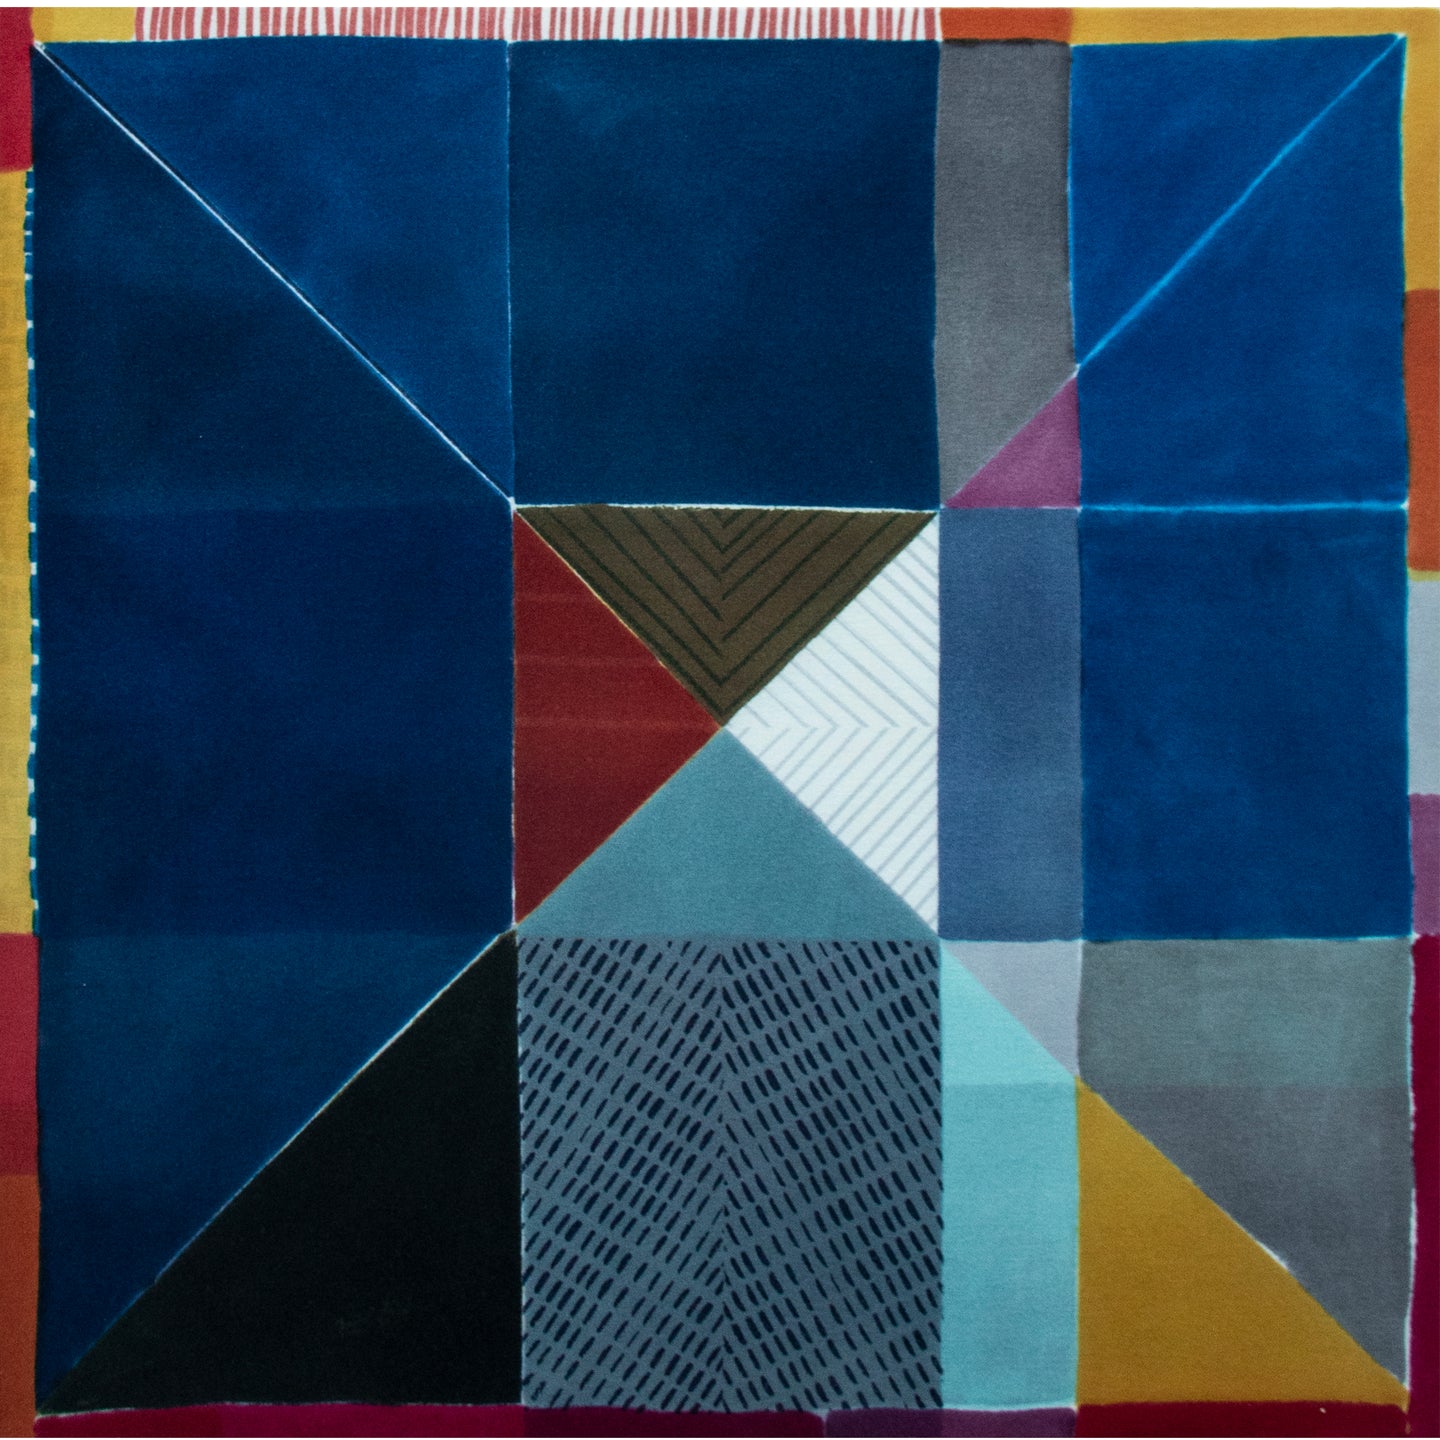 Jane Keith 'Colour Block grid' 100% wool 840mm x840mm x 45mm stretched panel